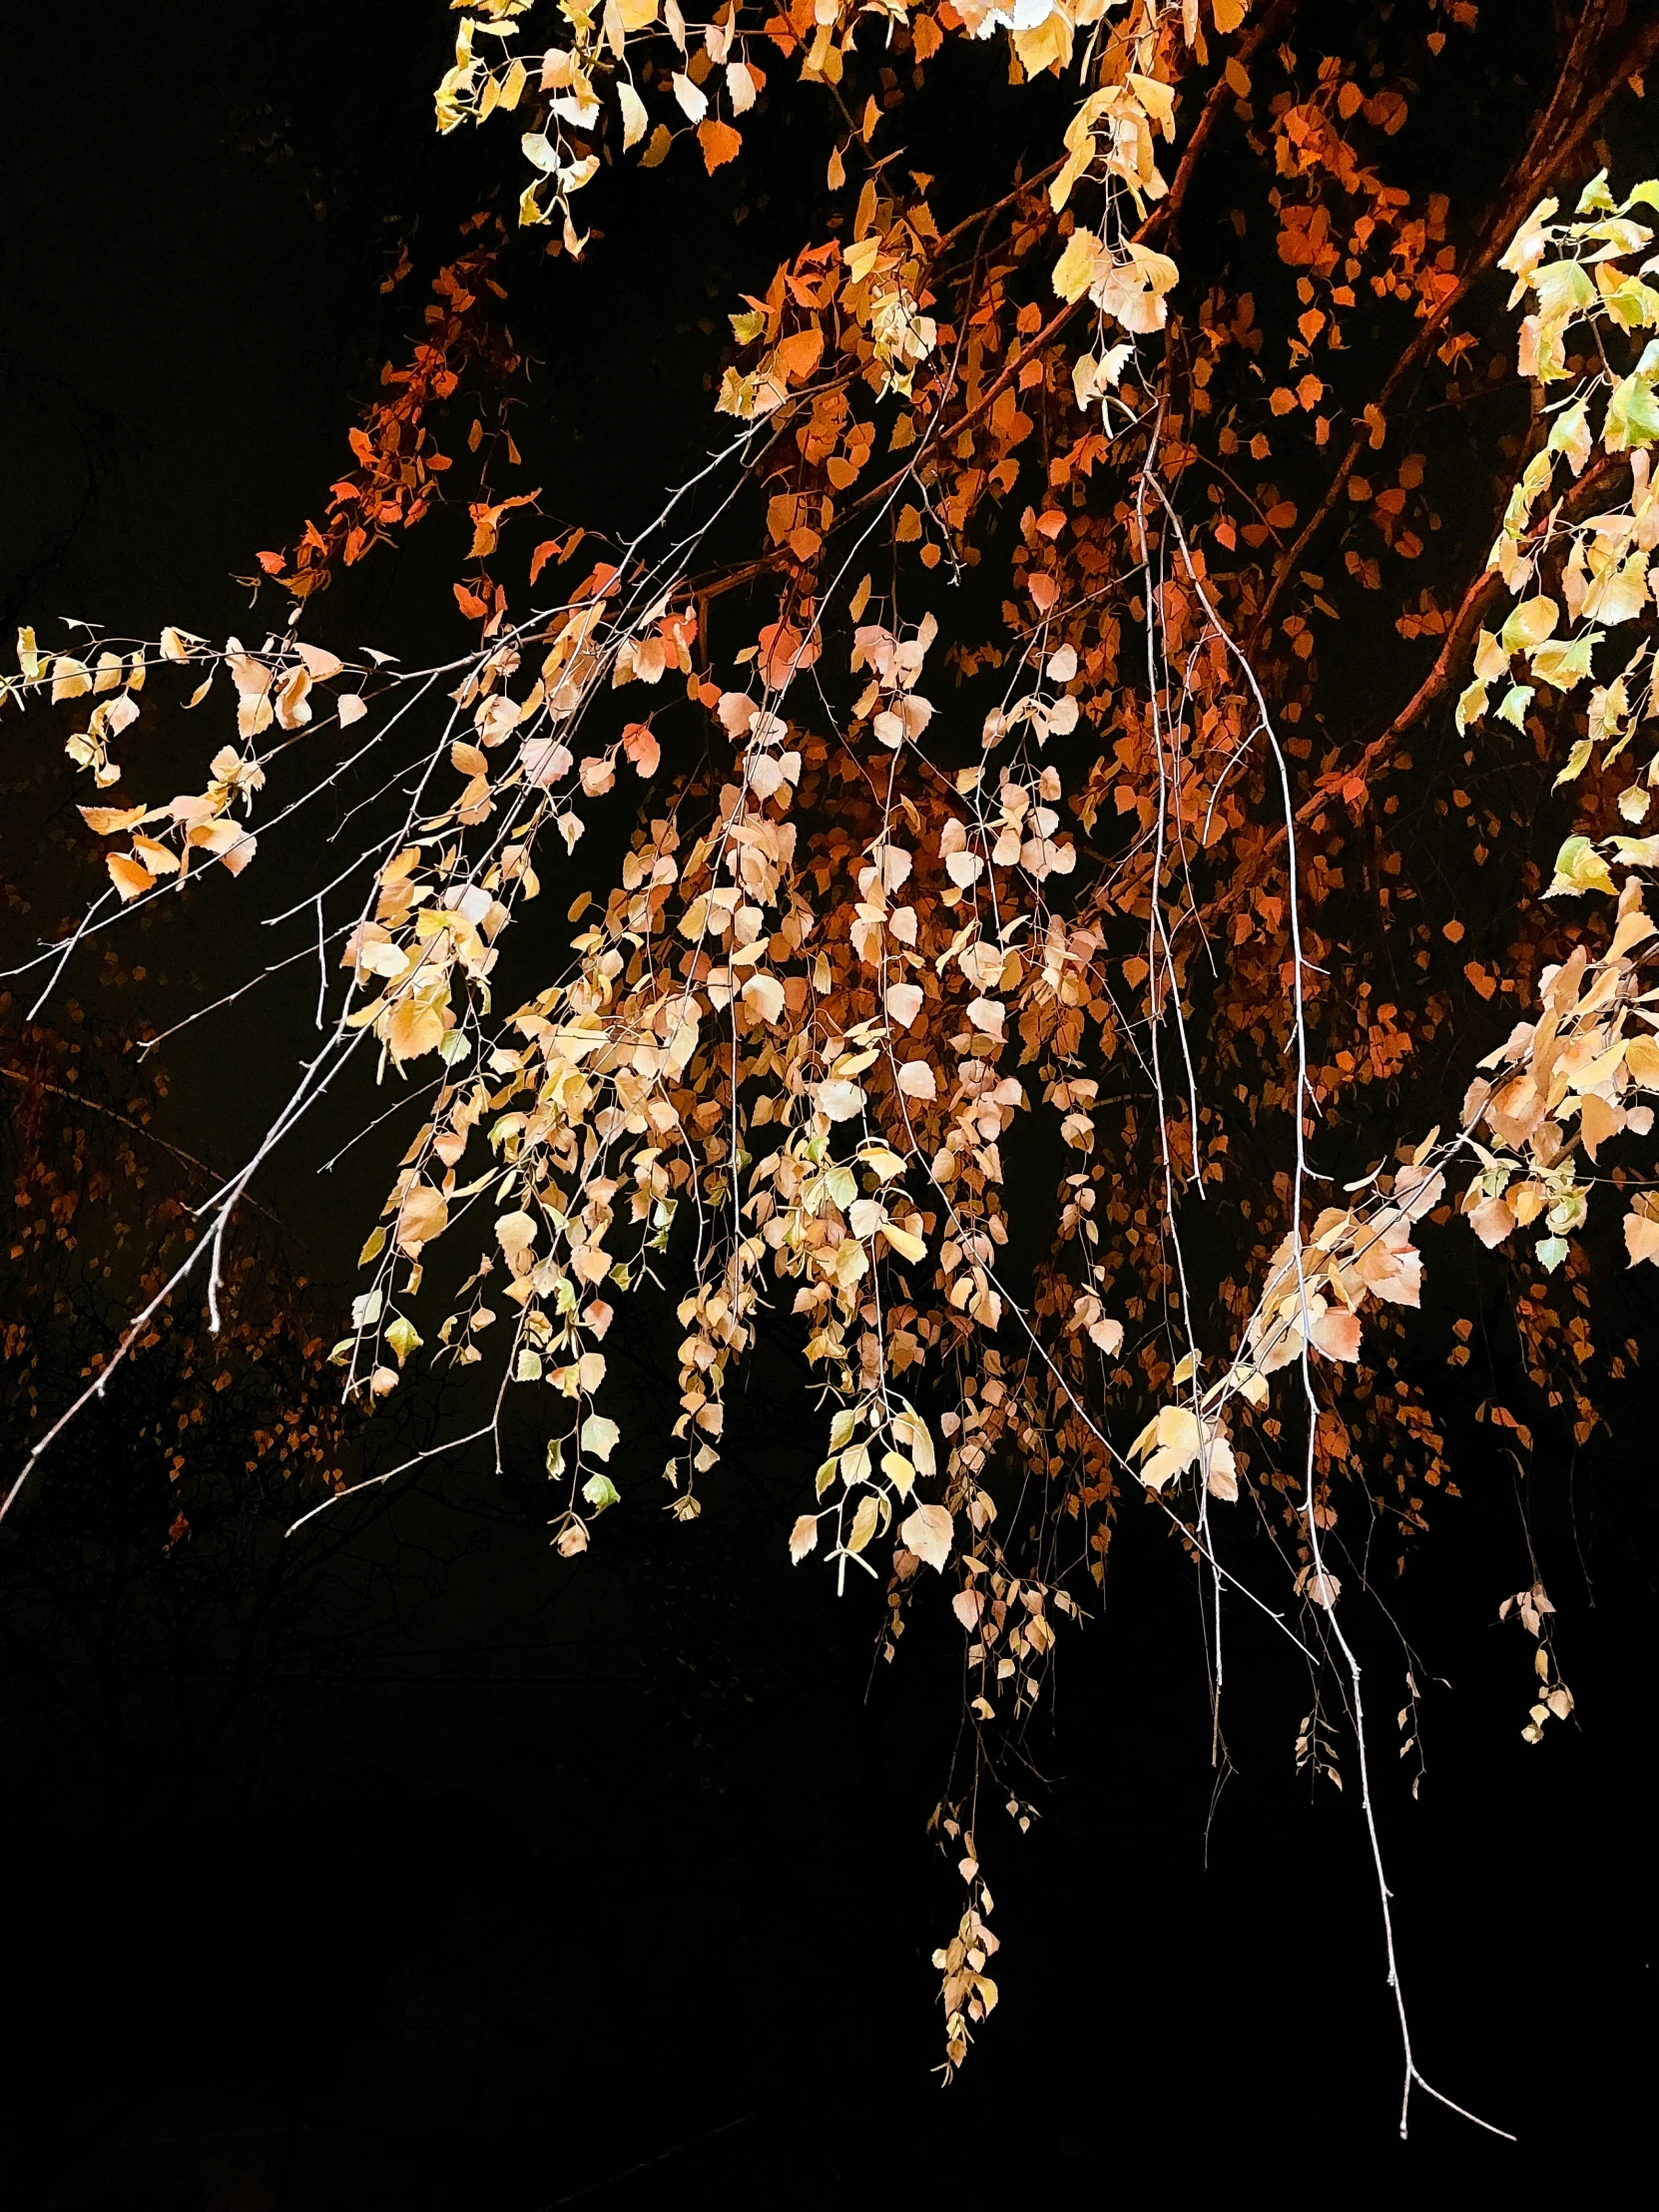 an abstract image of leaves on the trees